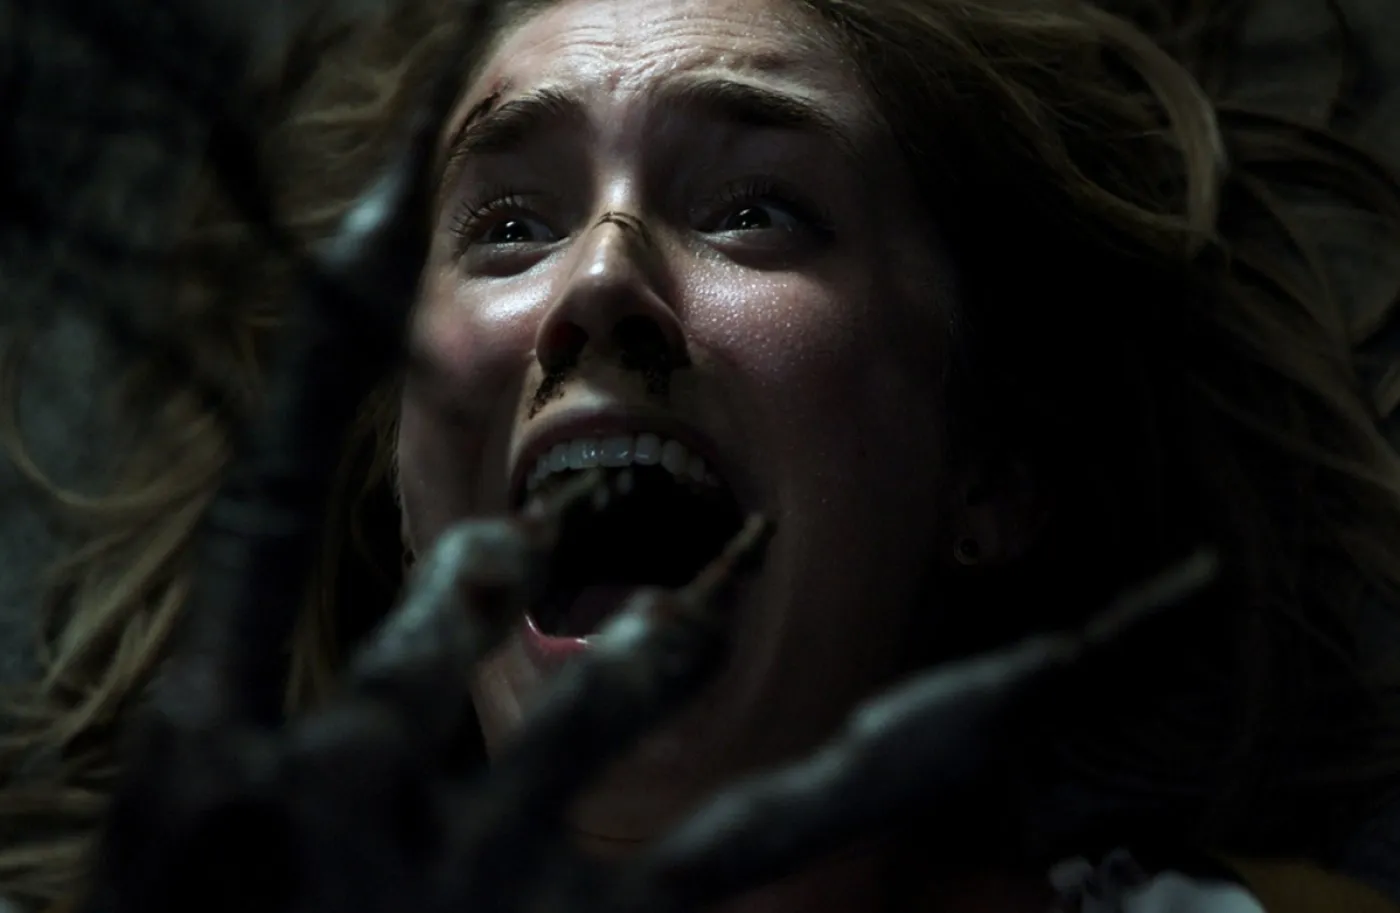 Melissa Rainier being attacked by "Key Face" in Insidious: The Last Key